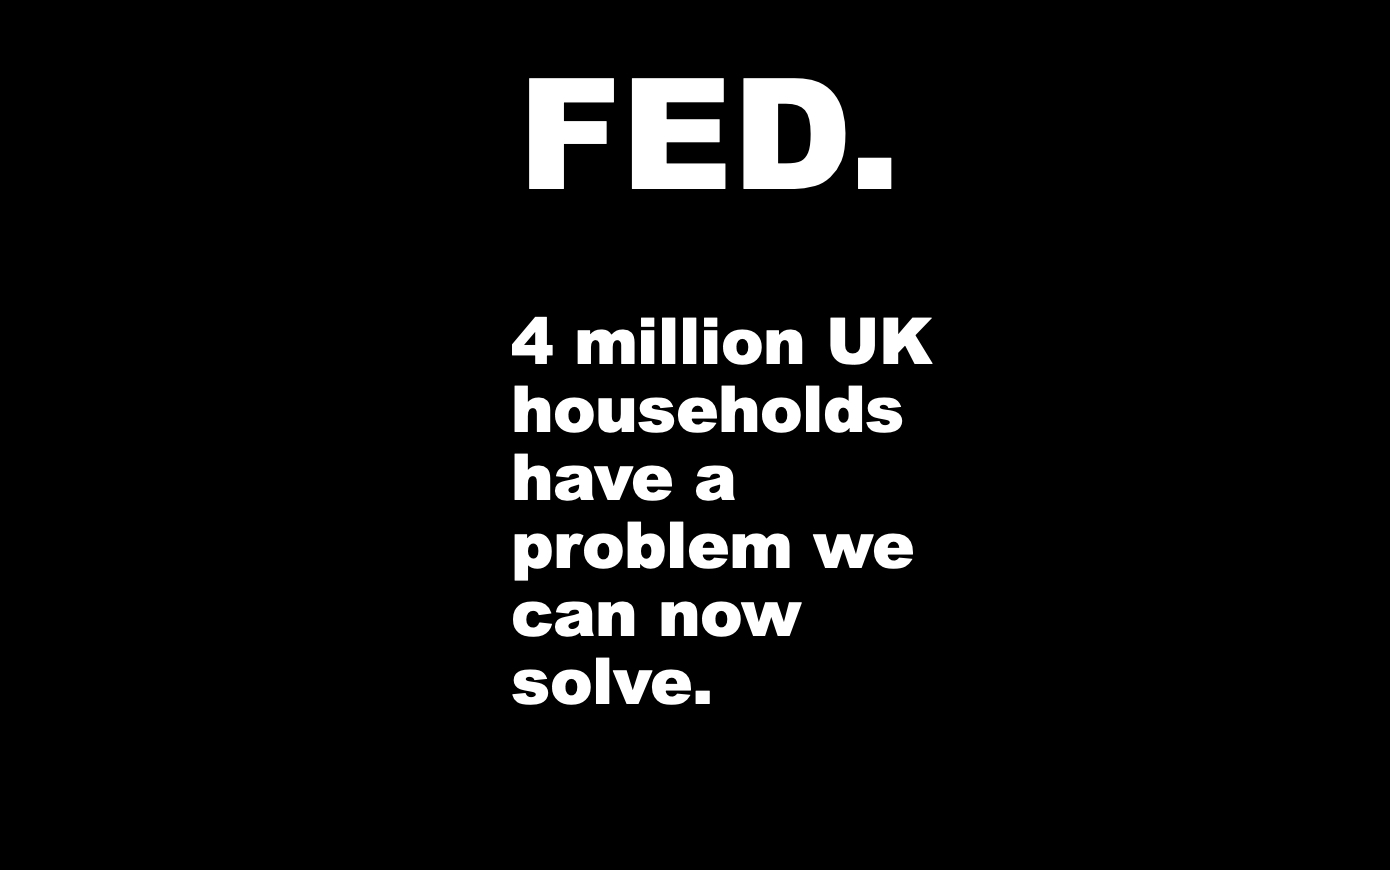 FED solution- 4 million households have a problem we can now solve.